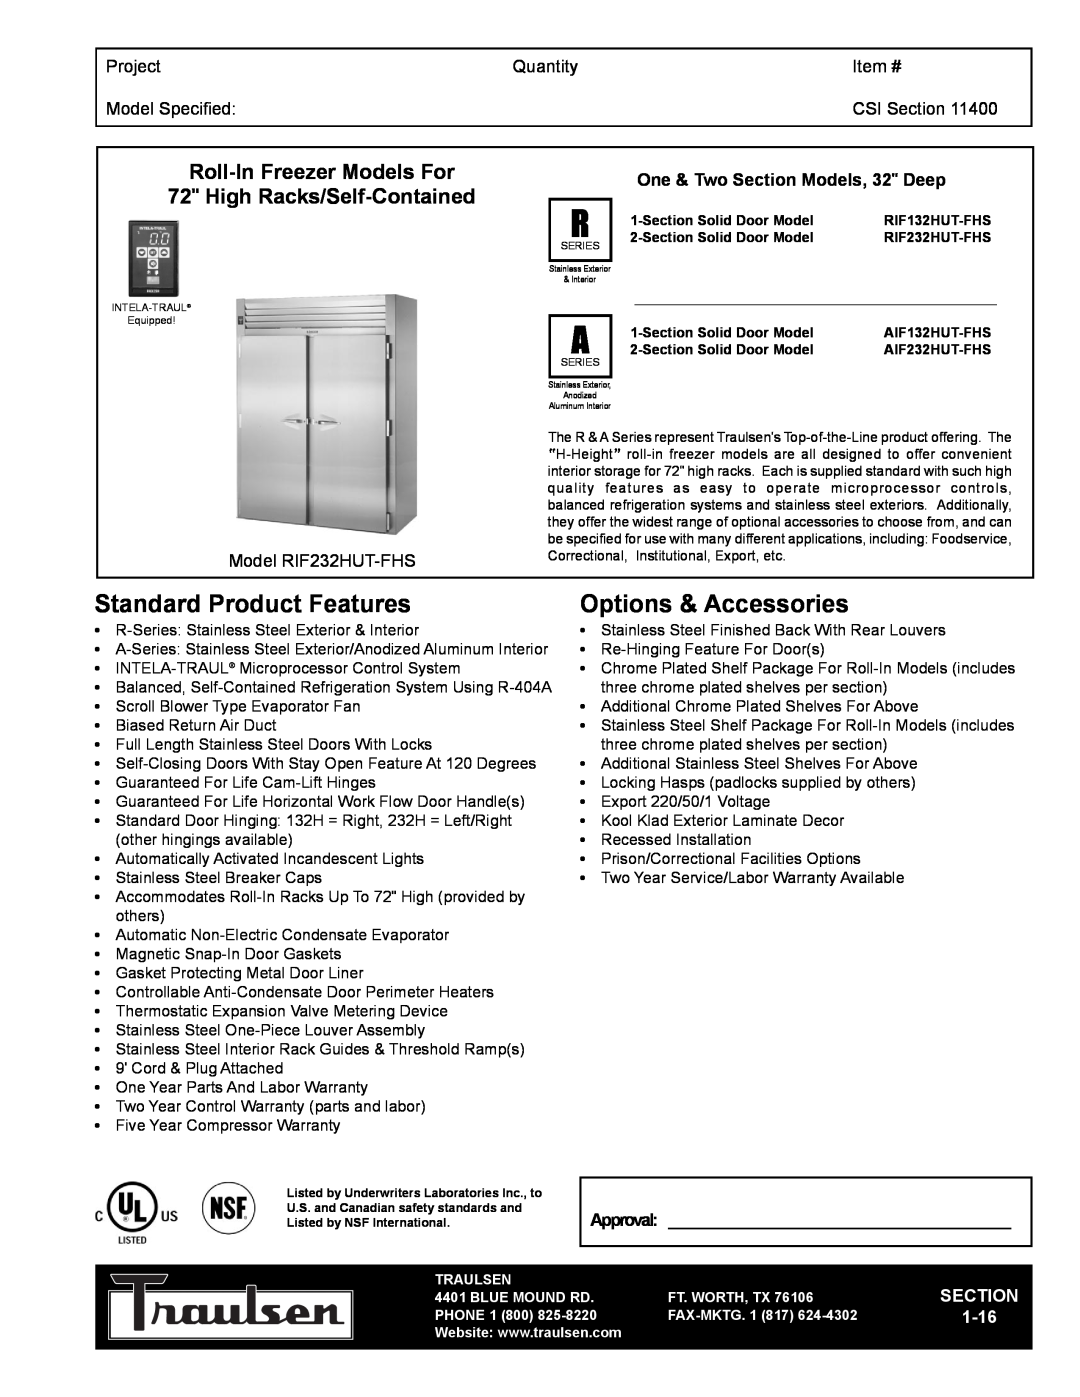 Traulsen RIF132HUT-FHS warranty Roll-InFreezer Models For, Project, Quantity, Item #, Model Specified, CSI Section, 1-16 